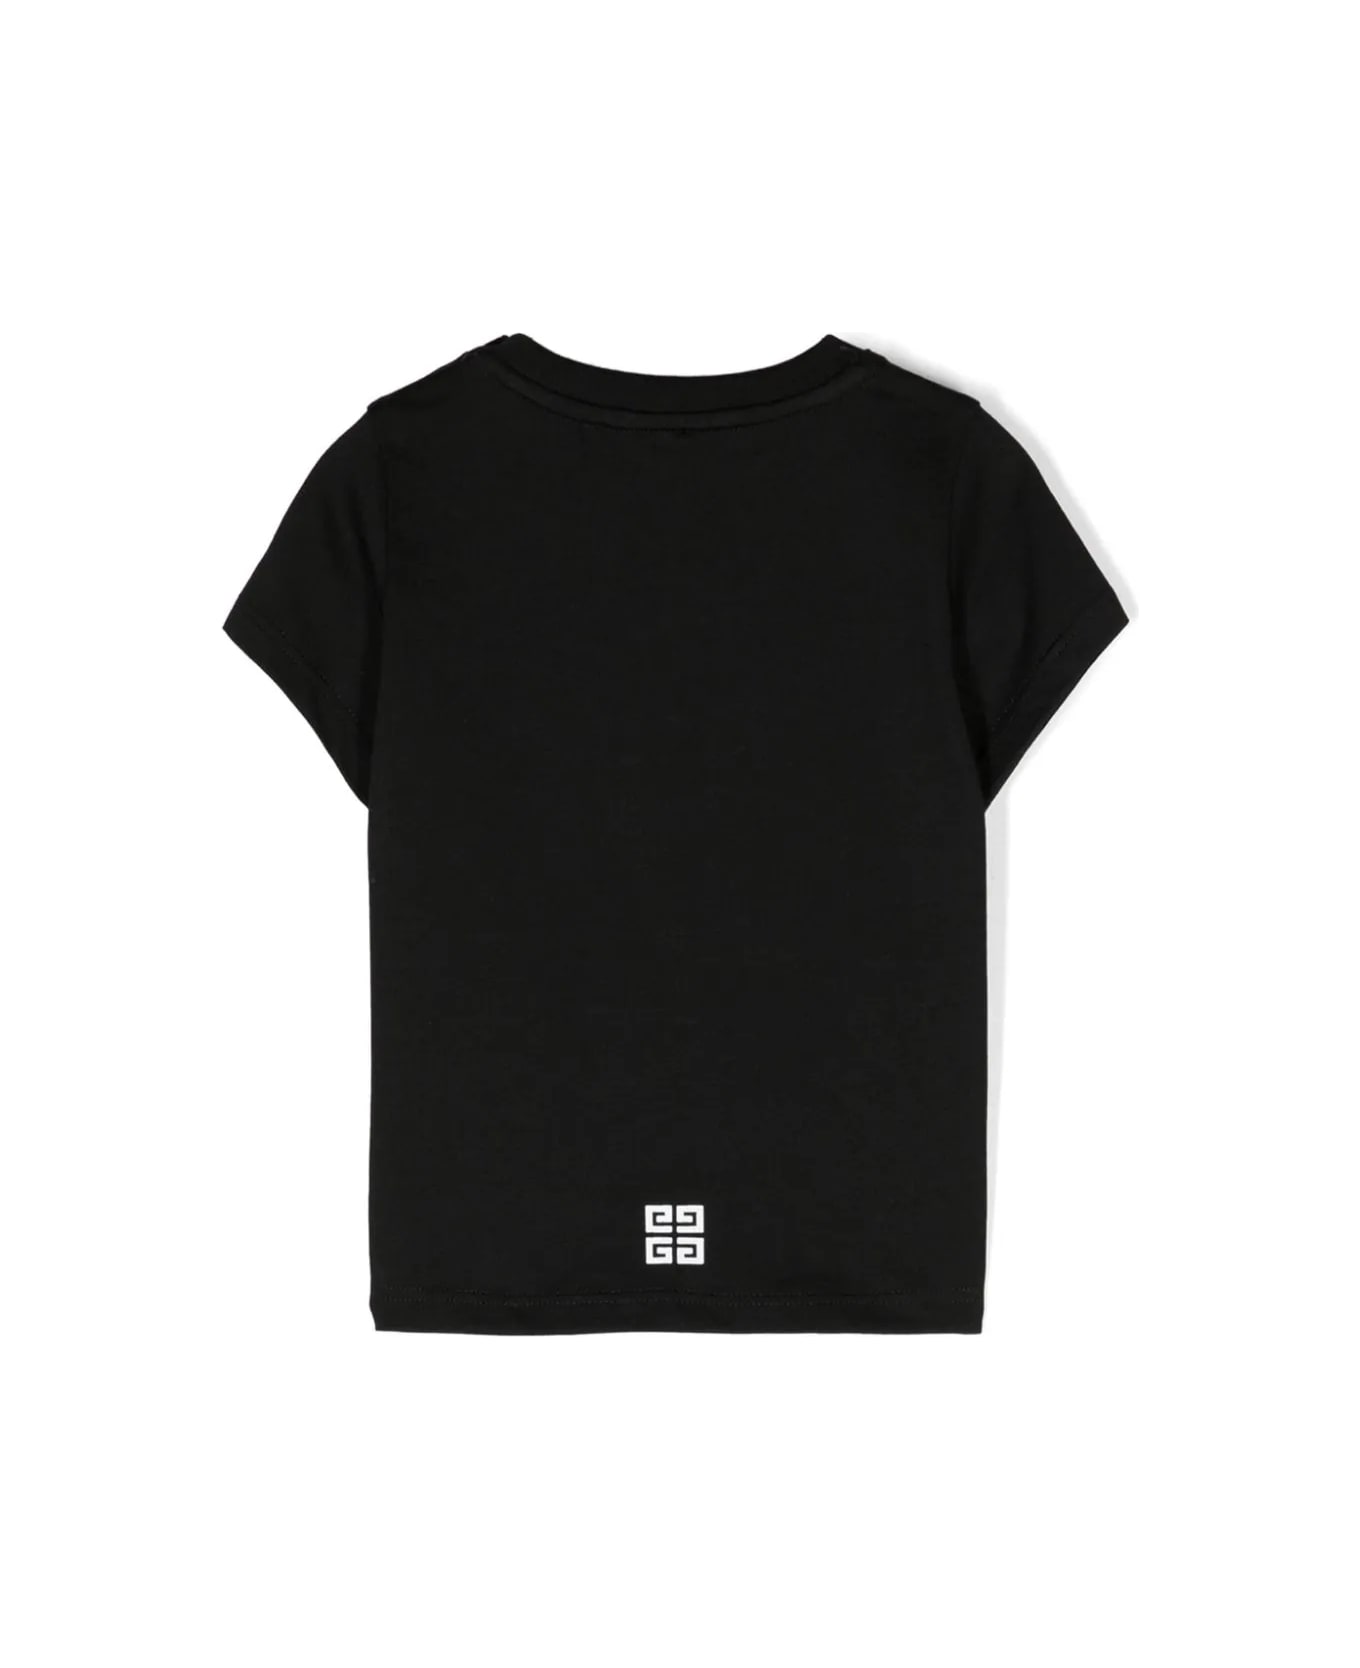 Givenchy T-shirt With Print - Black